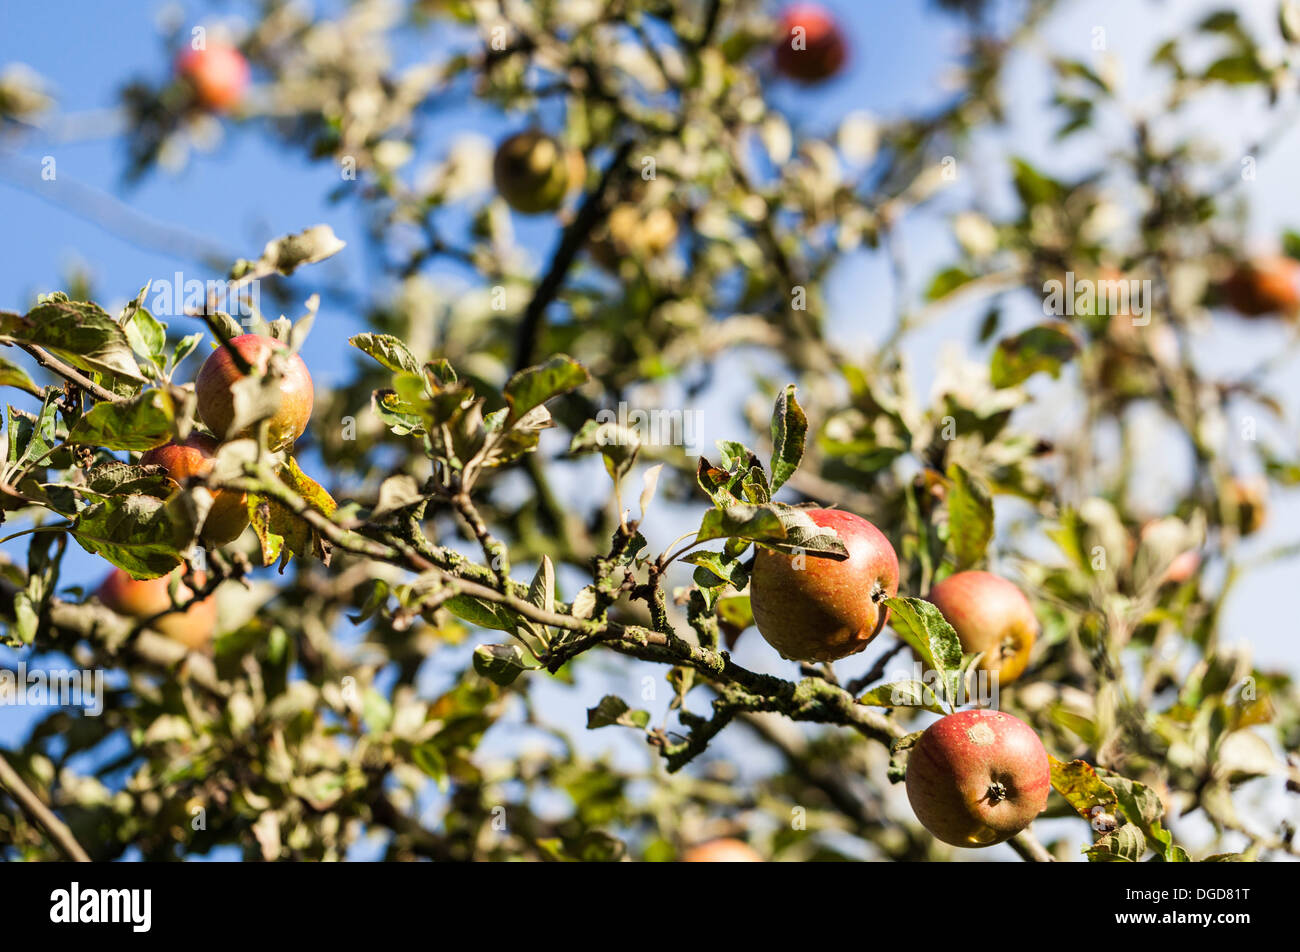 Cox's apples hanging on tree branches Stock Photo